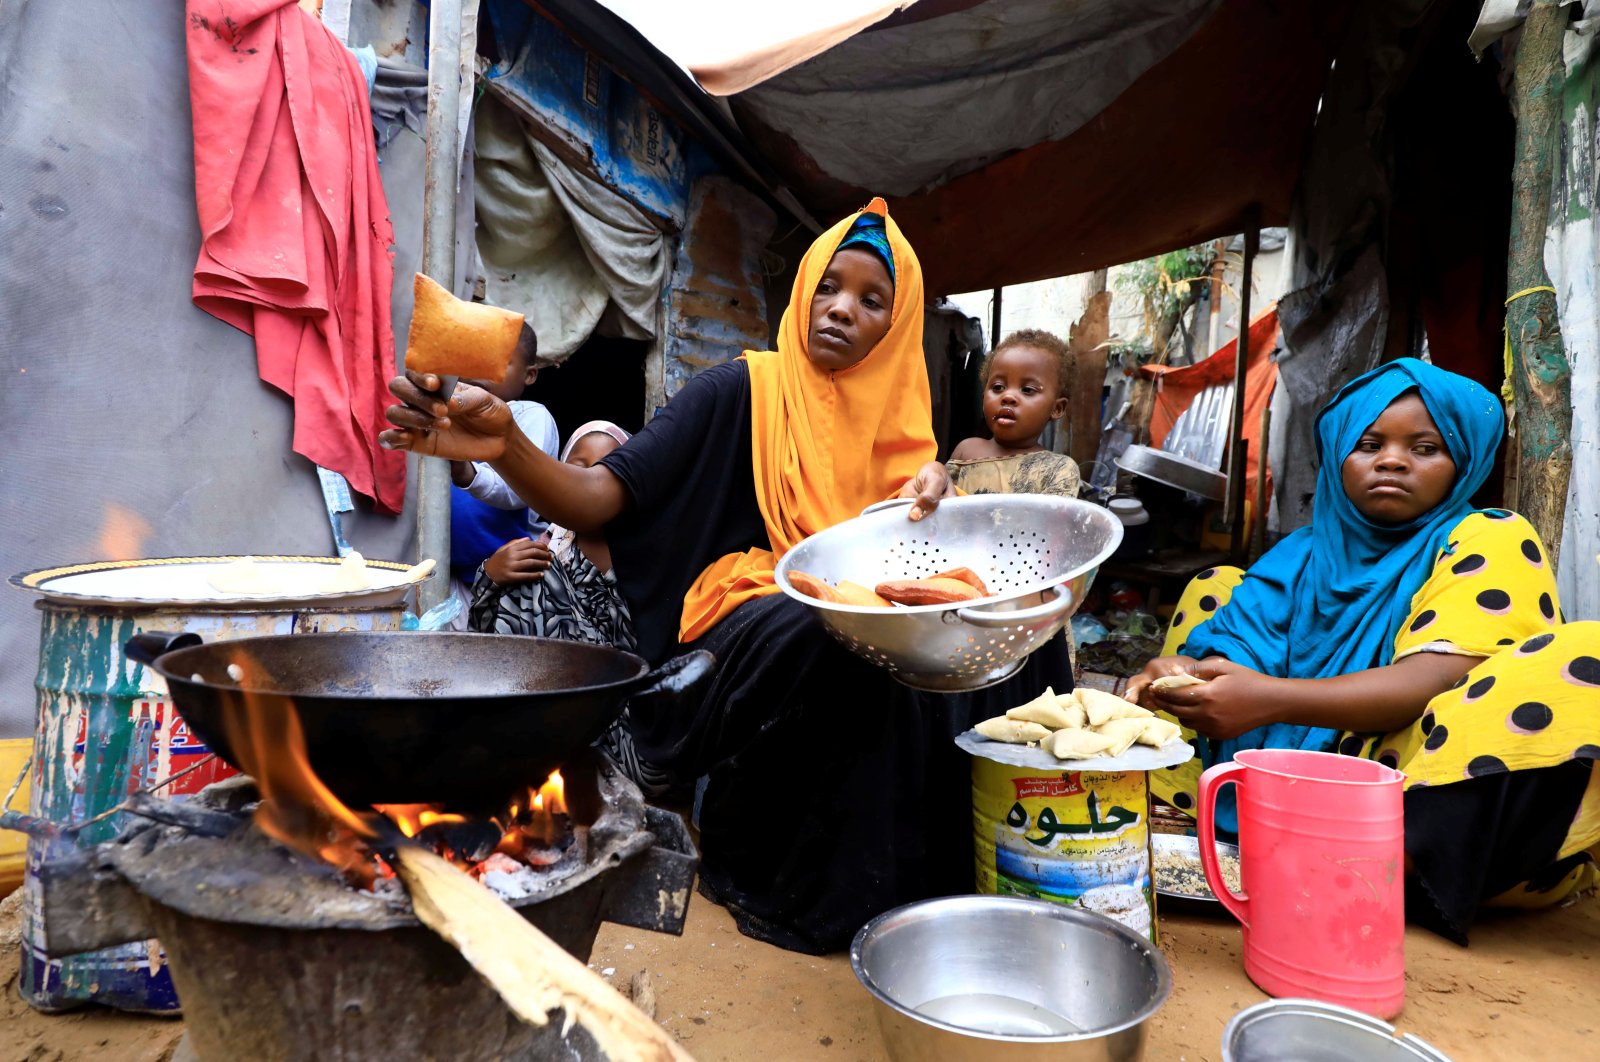 An internally displaced Somali woman and her children prepare their Iftar meal during the month of Ramadan at the Shabelle makeshift camp in Hodan district of Mogadishu, Somalia, April 24, 2020. (Reuters Photo)